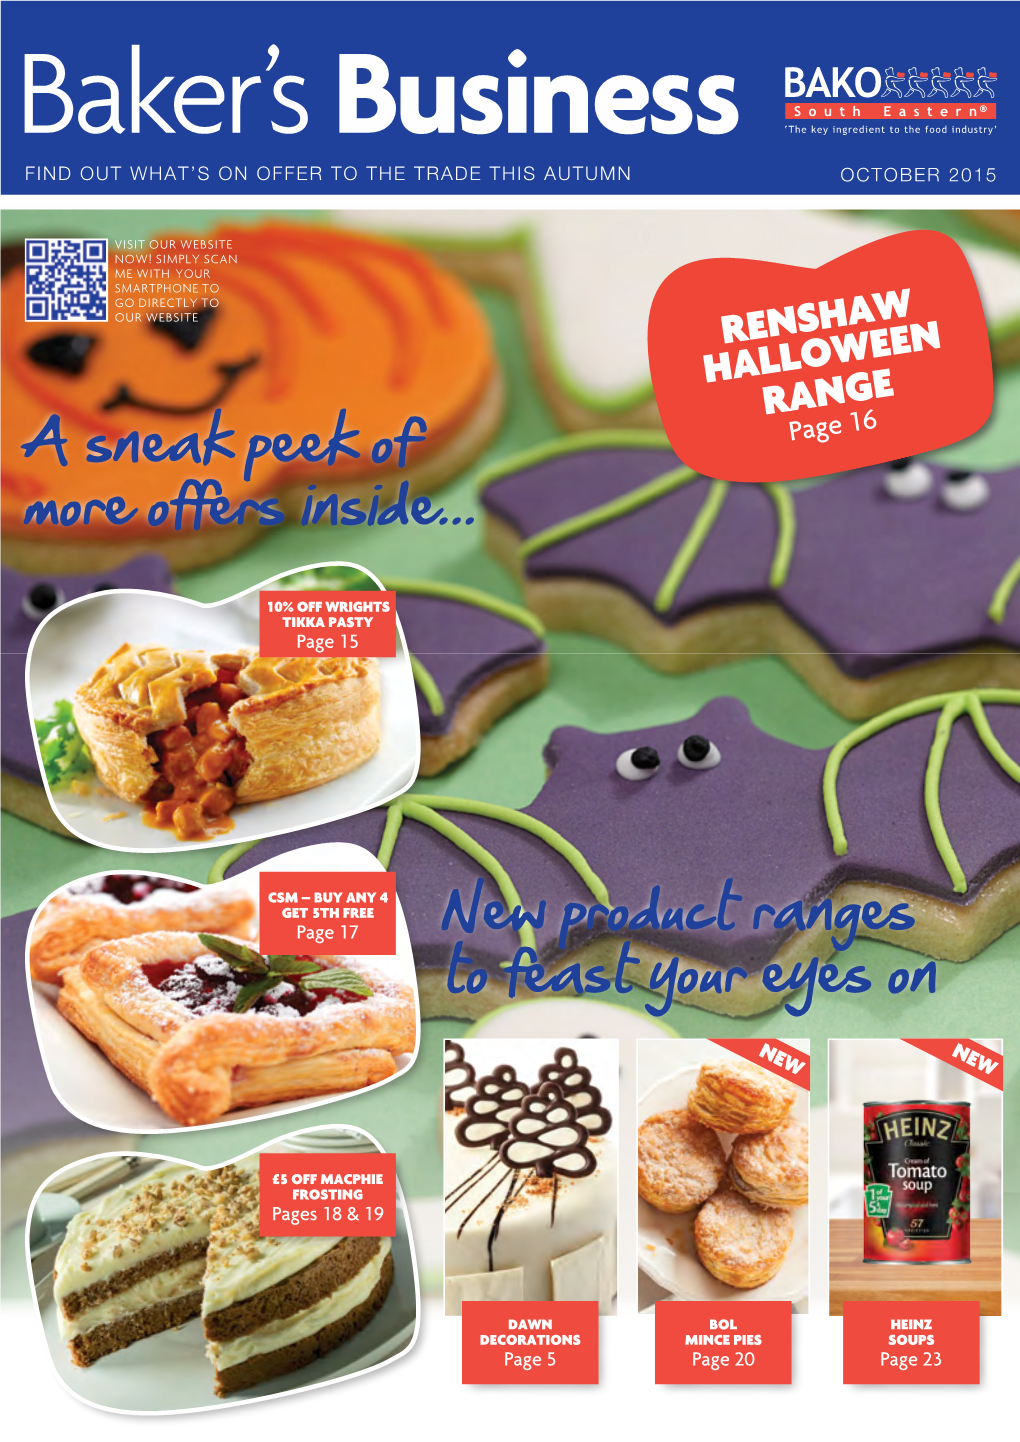 A Sneak Peek of More Offers Inside... New Product Ranges to Feast Your